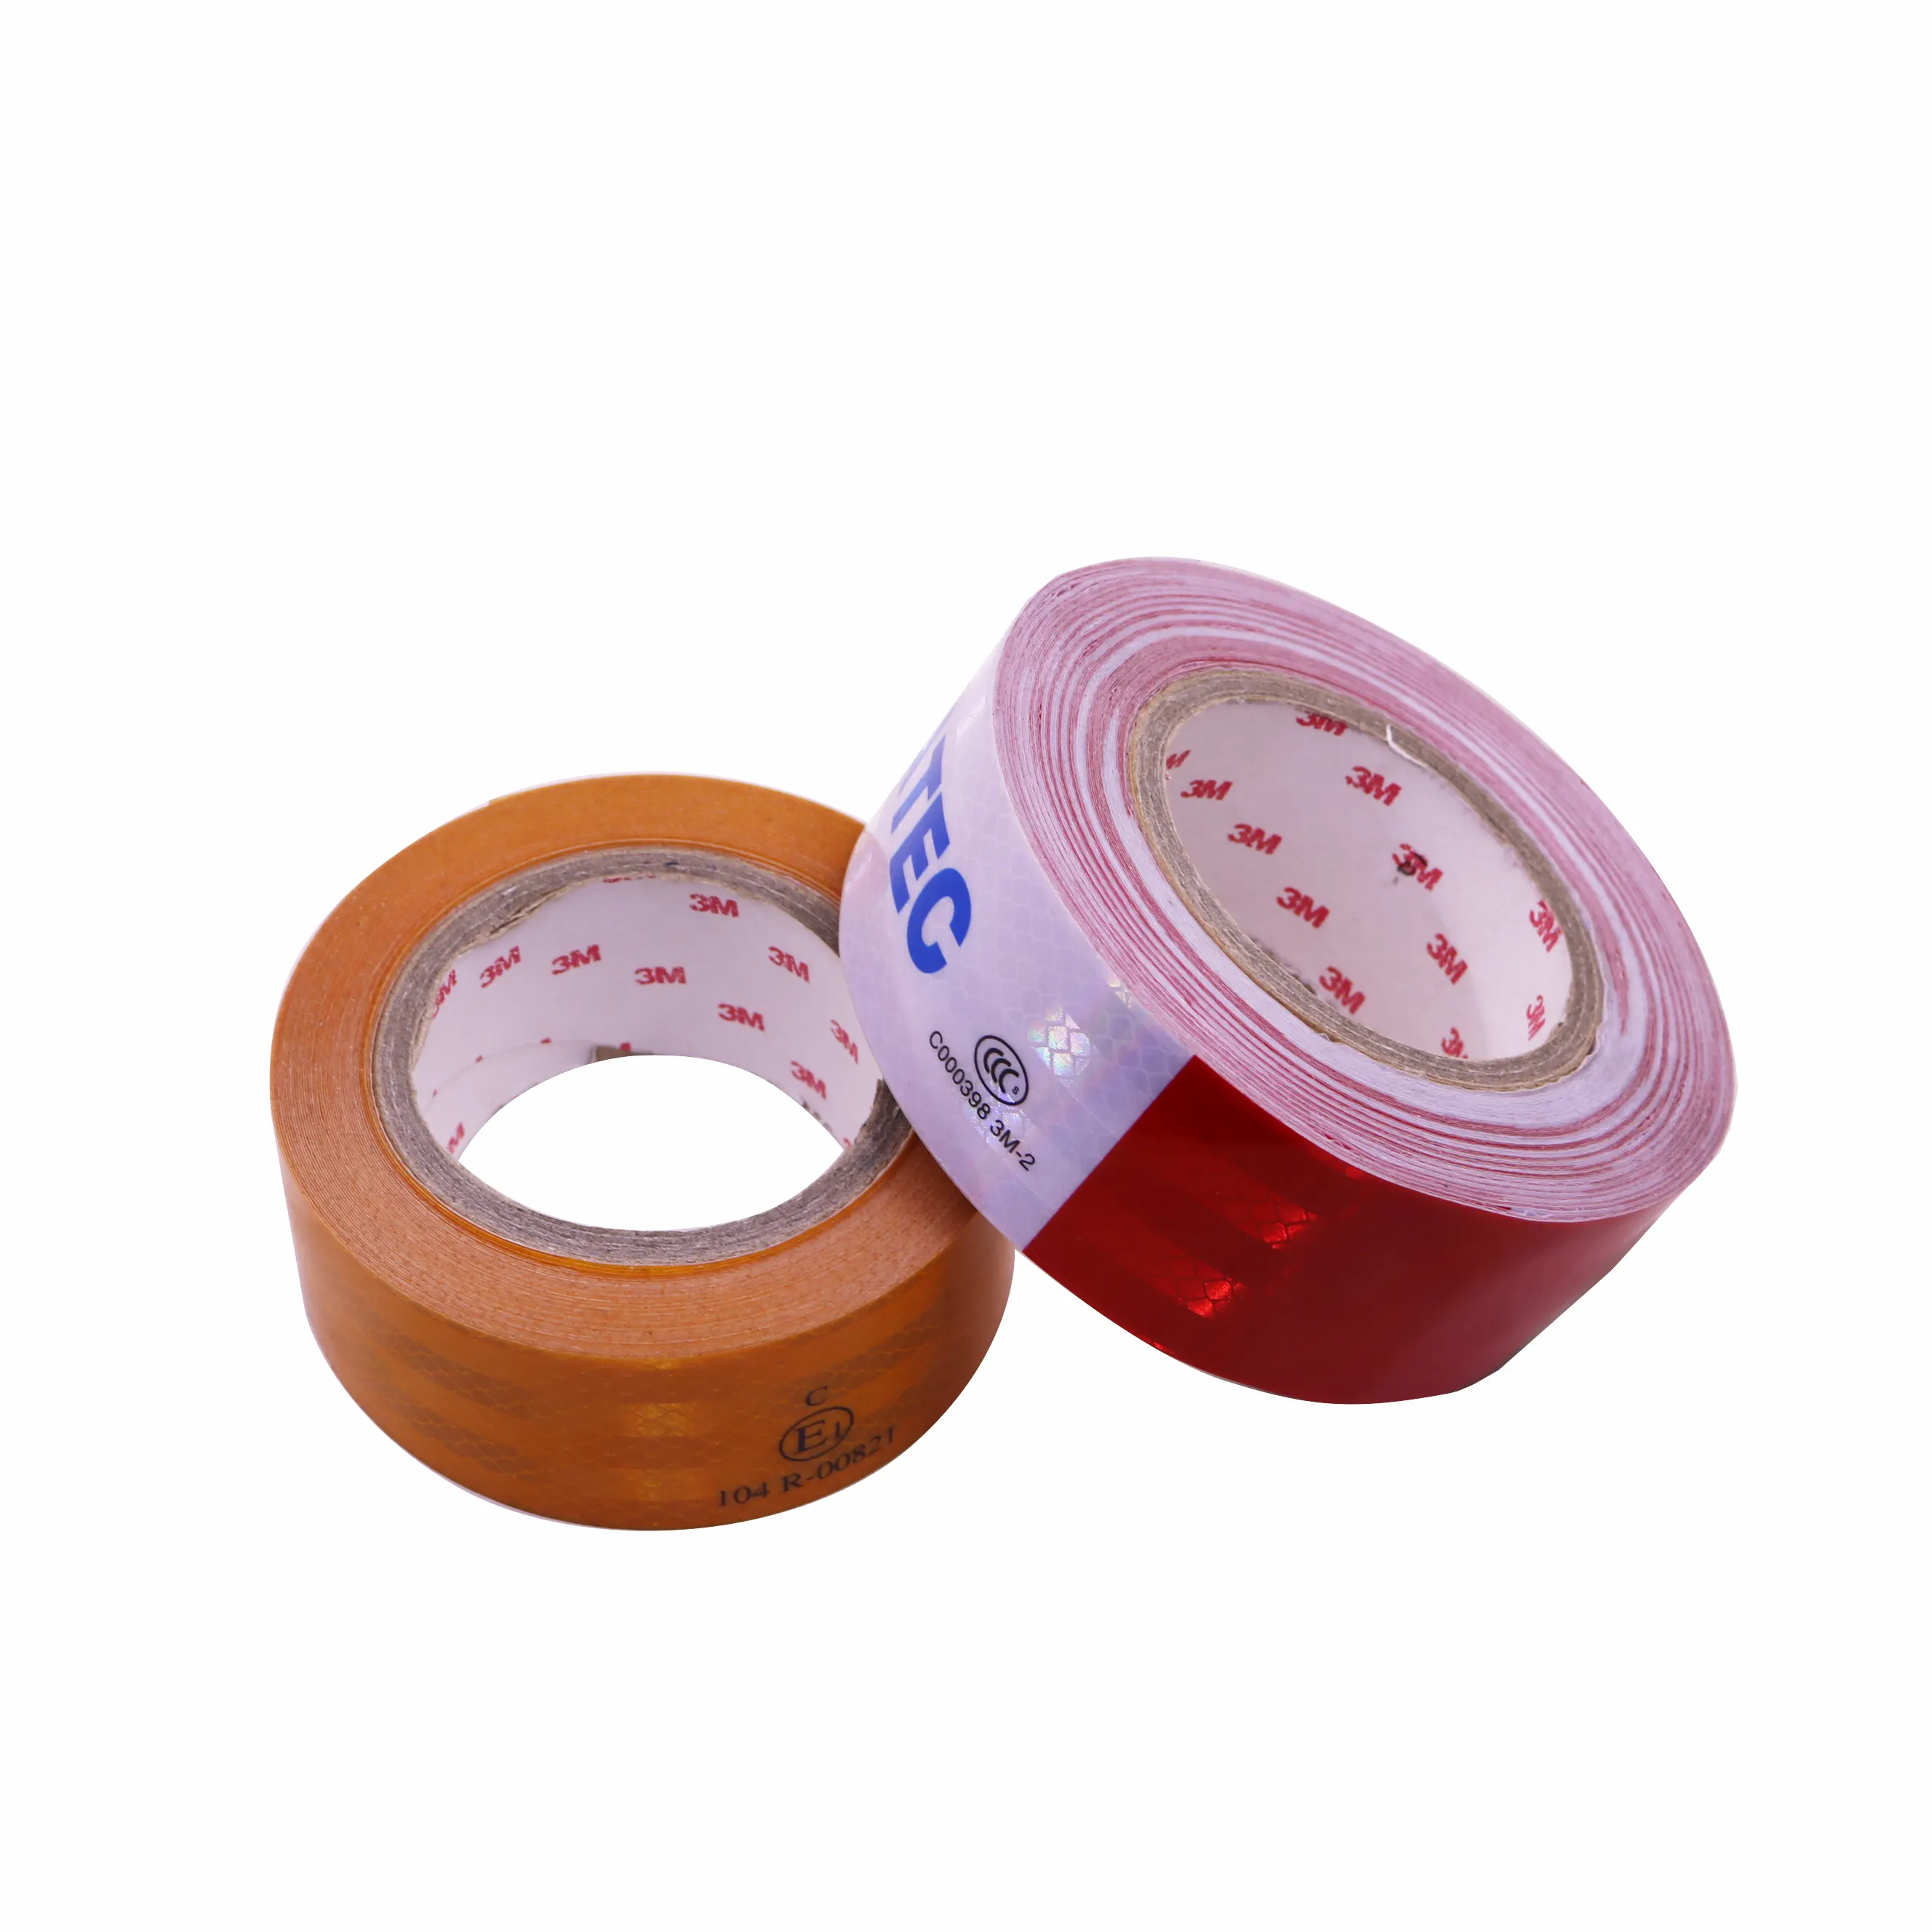 Custom Truck New Model 50mm Red White Night Safety Adhesive Reflective Sticker Roll Bright Reflective Tape